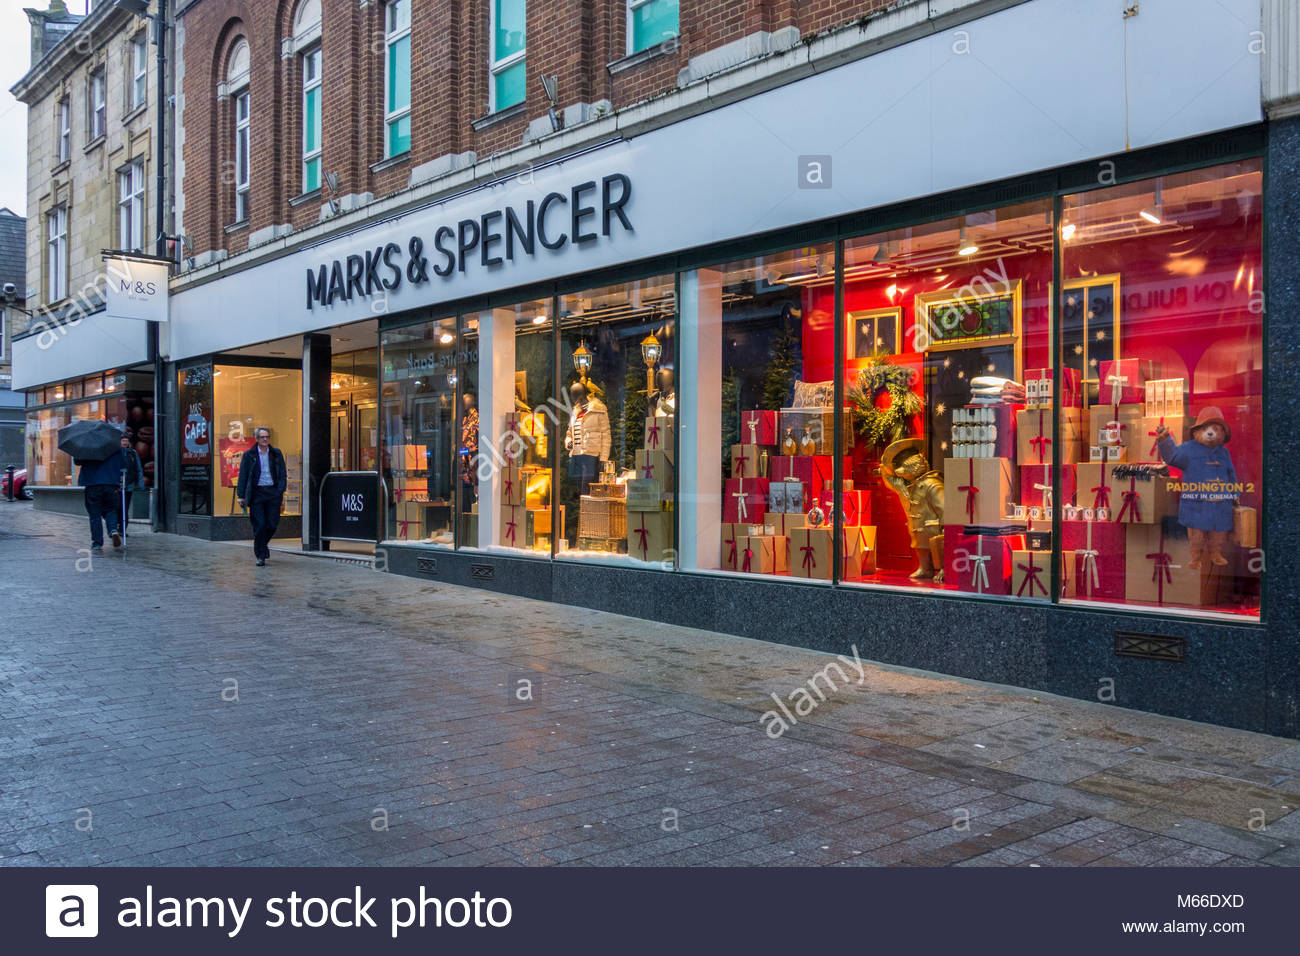 Penny Spencer High Resolution Stock Photography and Images - Alamy